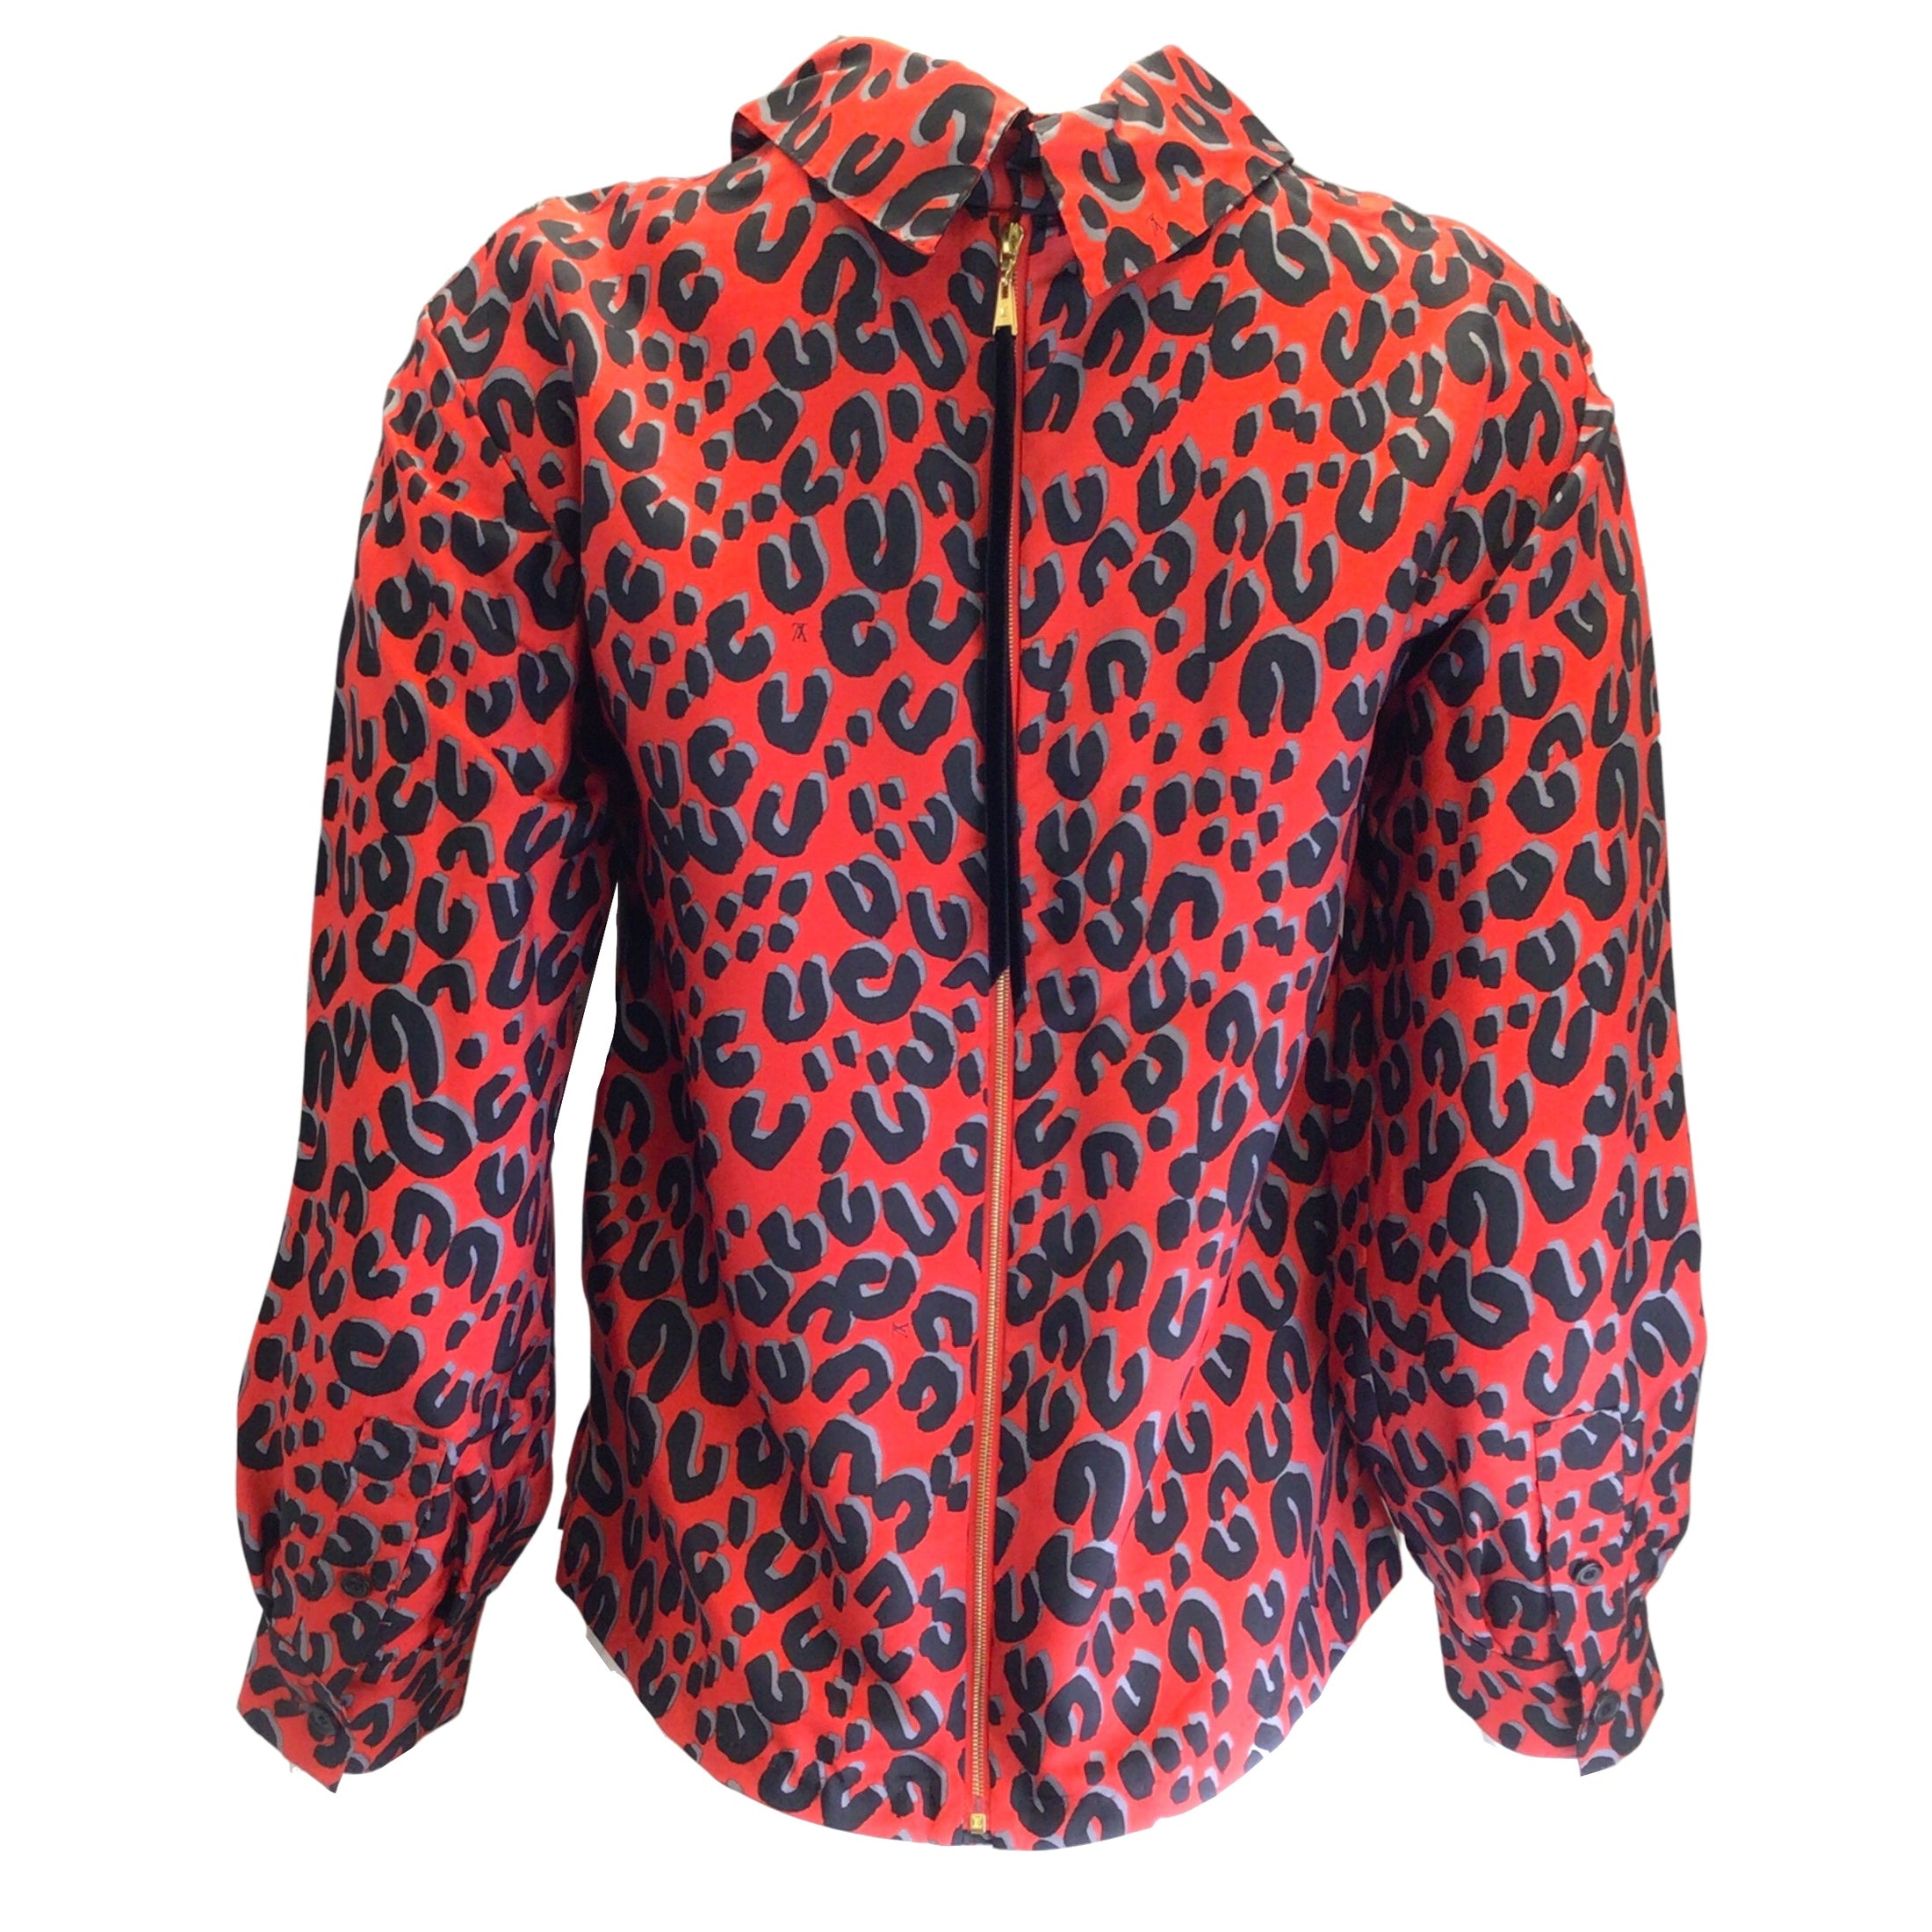 Louis Vuitton x Stephen Sprouse Red / Navy Blue Leopard Printed Blouse